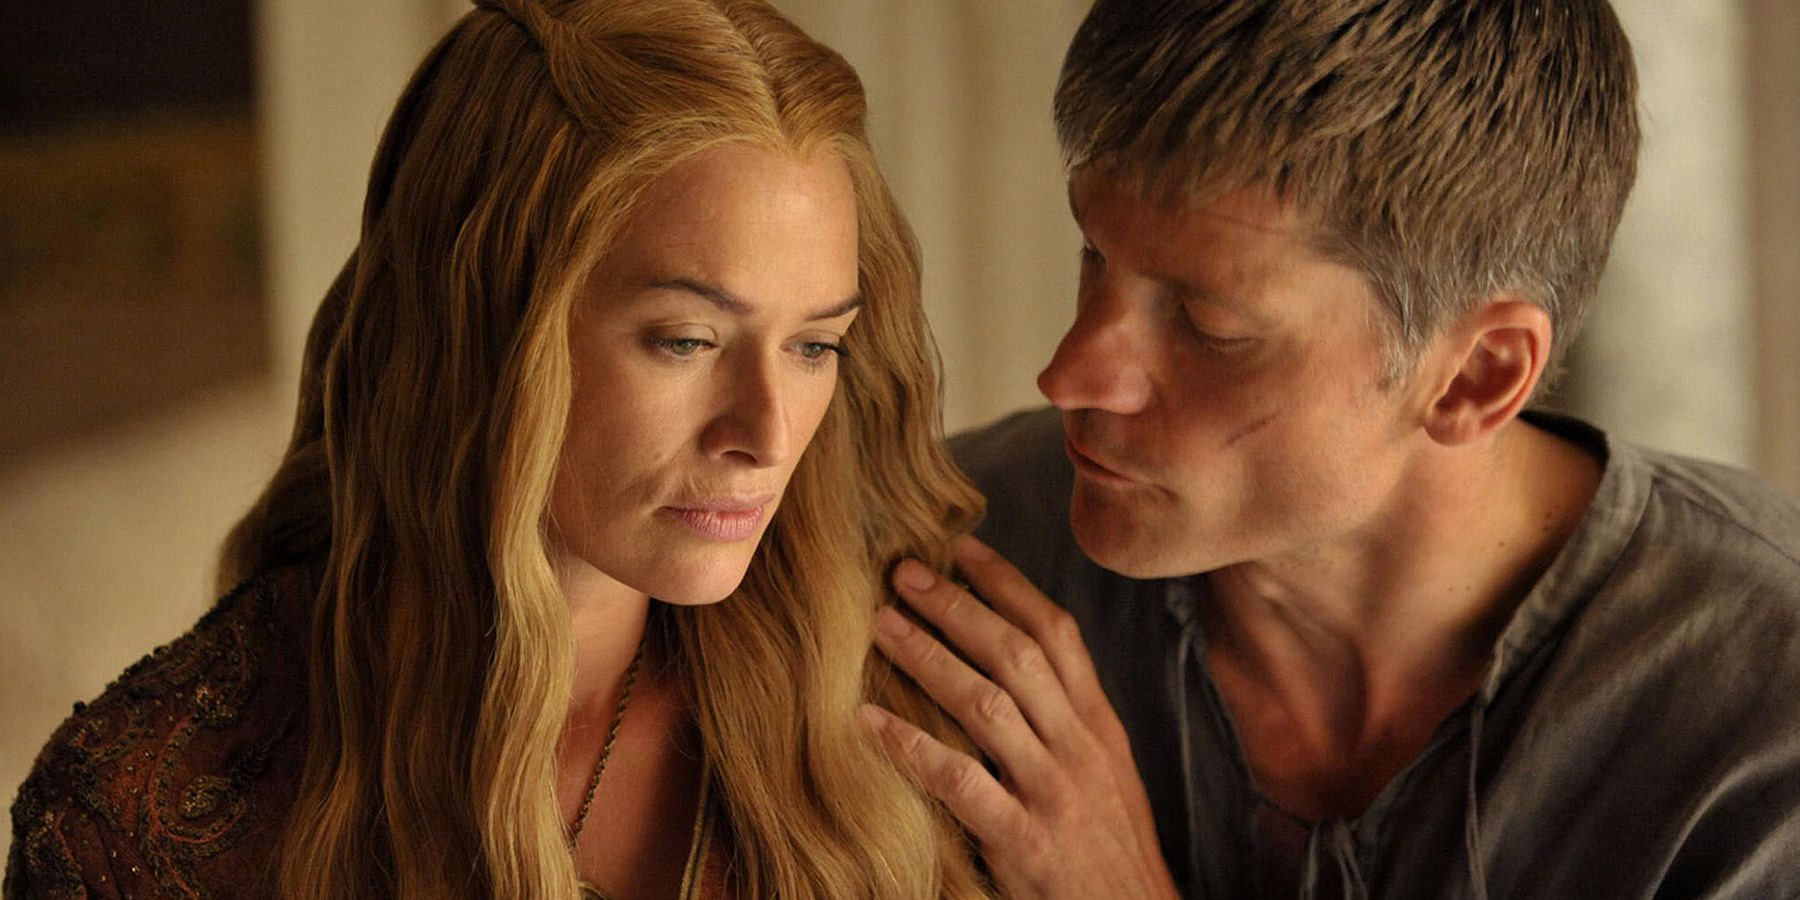 Jaime and Cersei Lannister